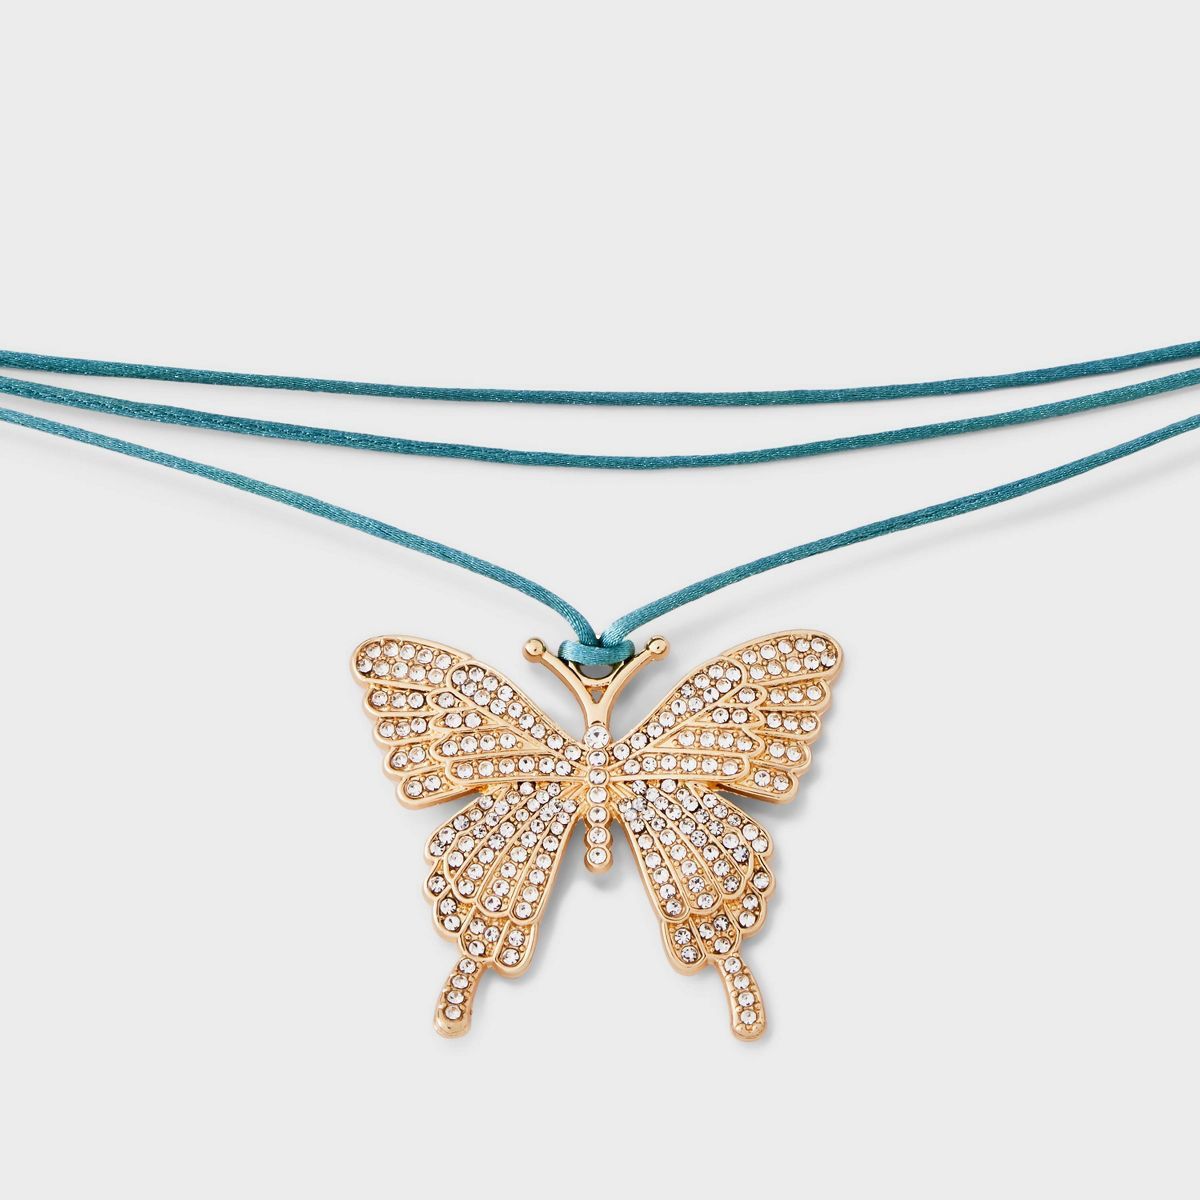 Adjustable Cord Crystal Butterfly Choker Necklace - Wild Fable™ Teal/Gold | Target